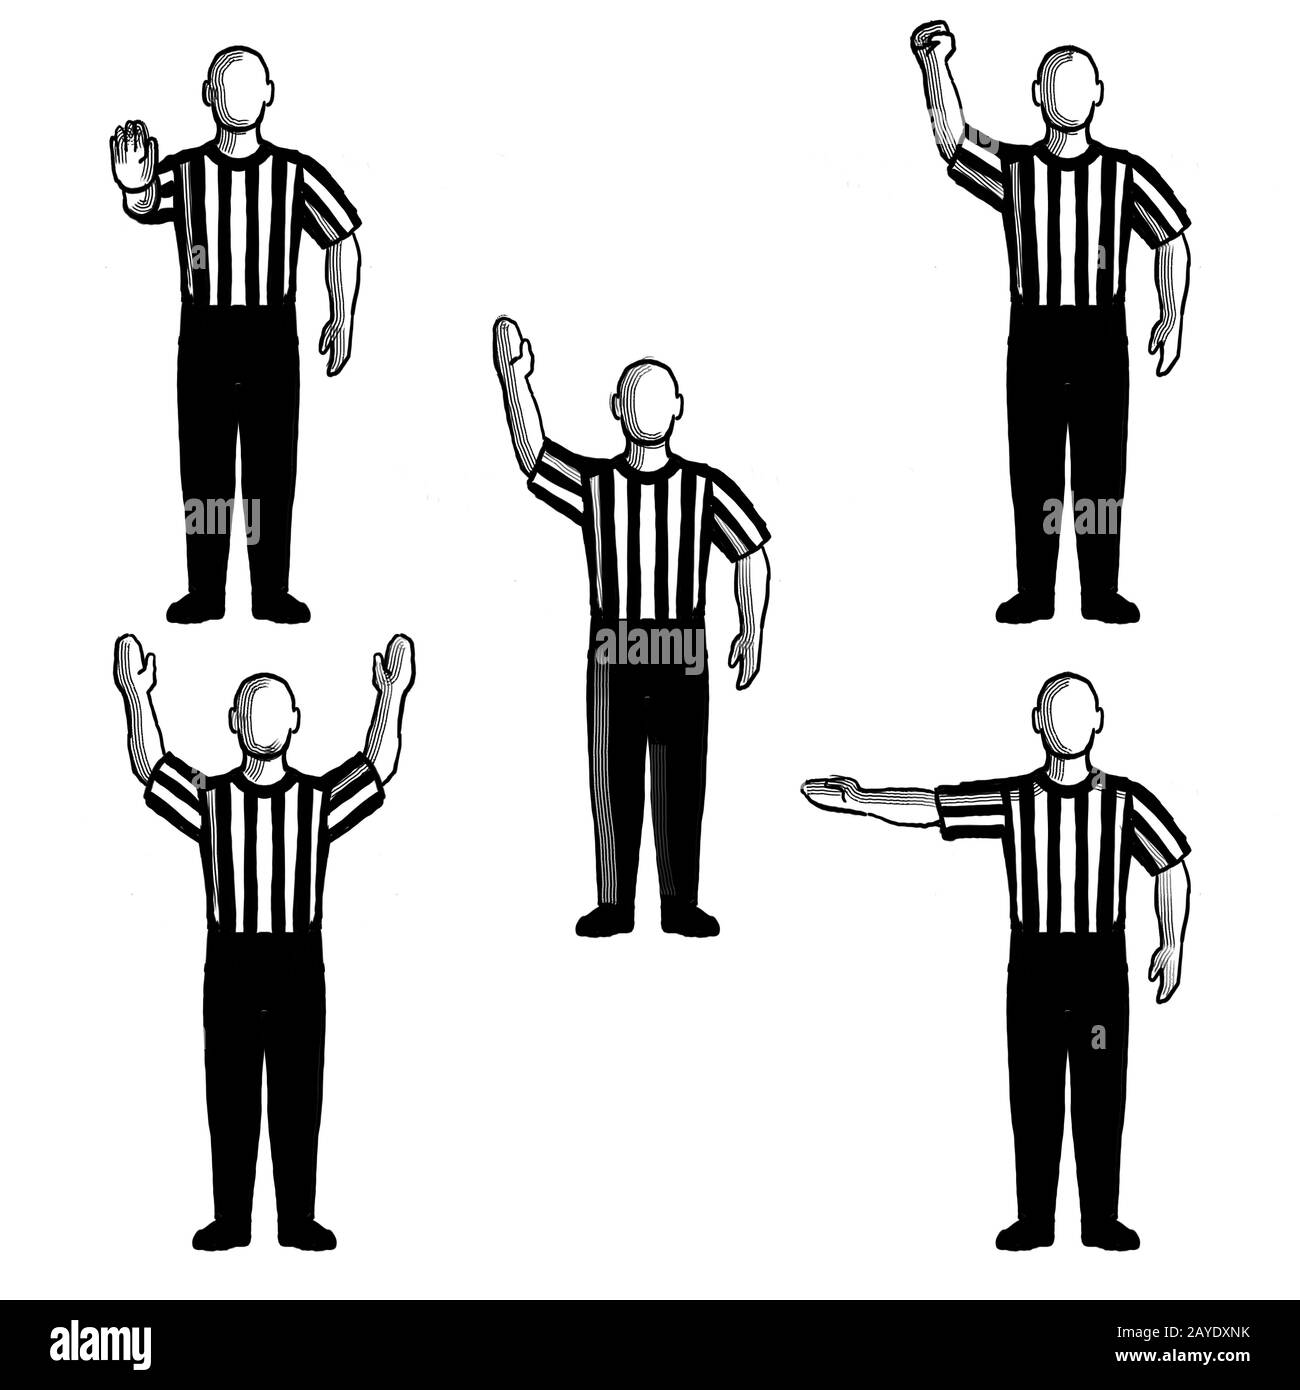 Basketball Umpire or Referee Hand Signals Drawing Set Collection Stock  Photo - Alamy